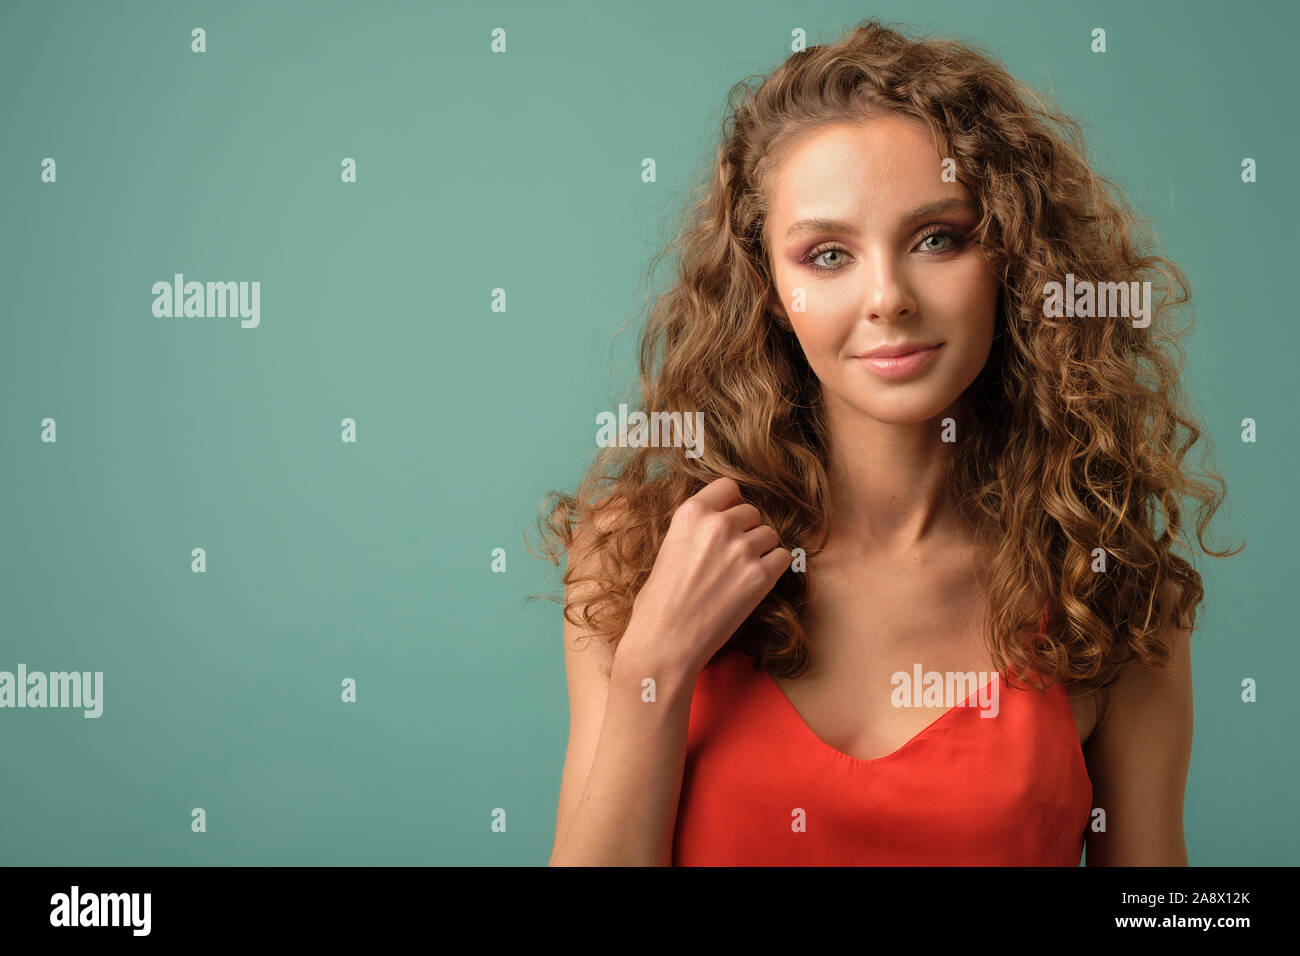 Closeup portrait of pretty caucasian girl with curly hair in red shirt posing in studio isolated on blue background Stock Photo